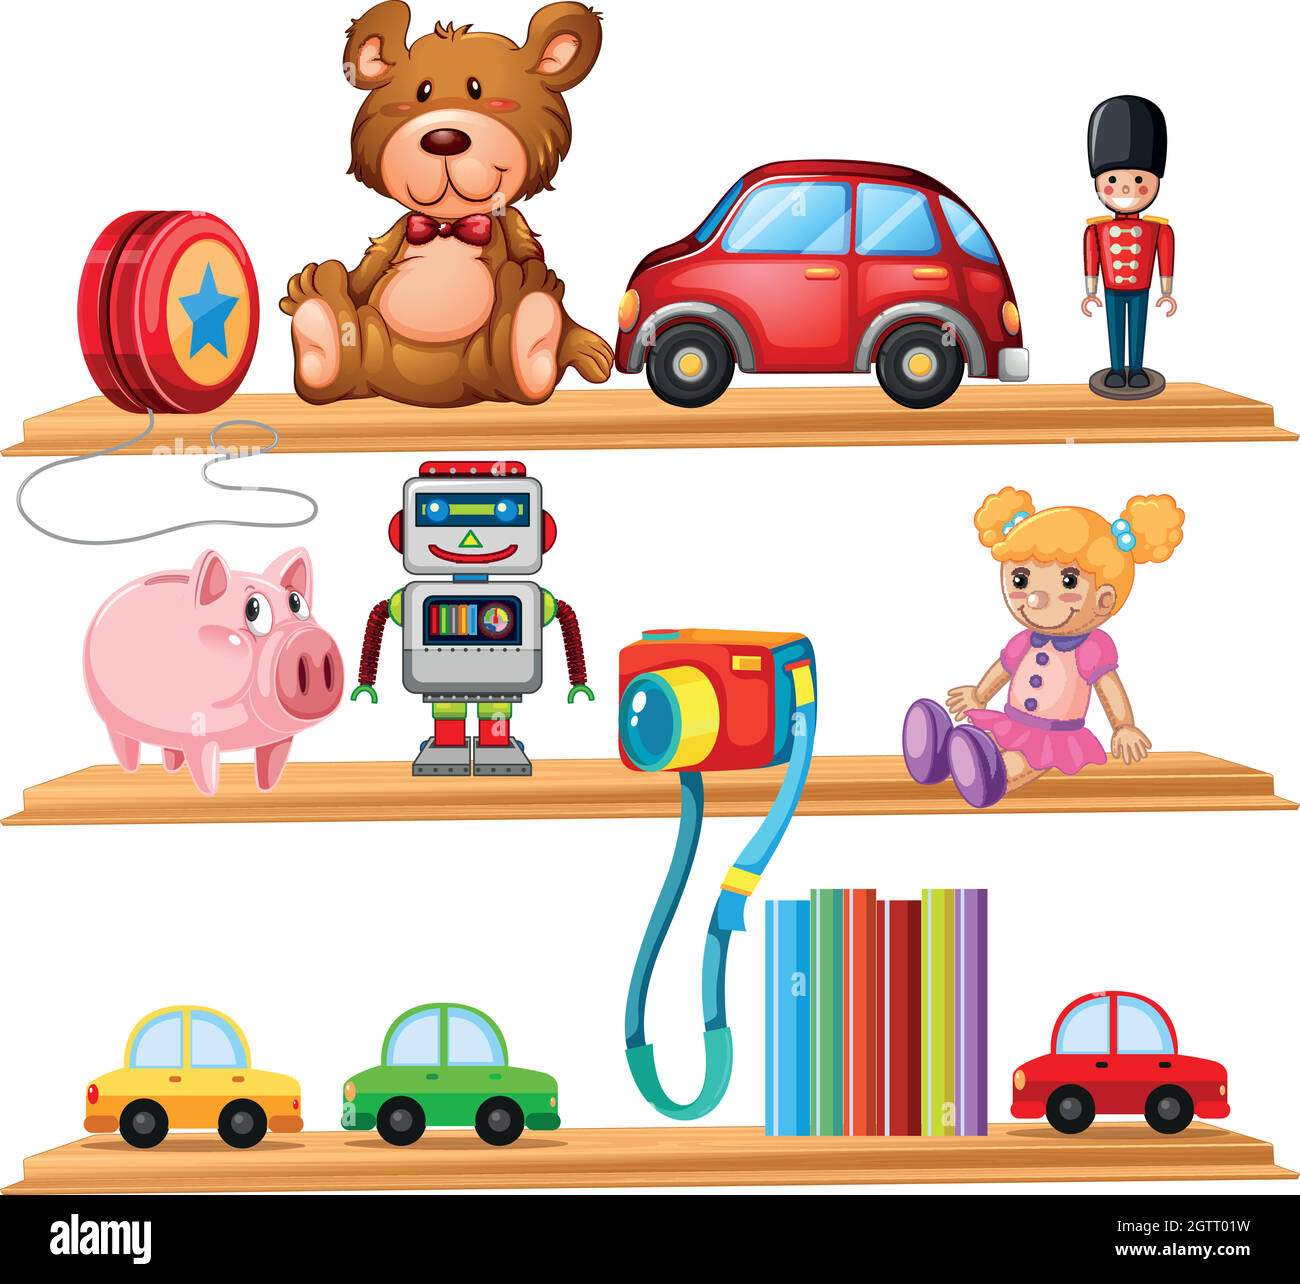 Many toys and books on wooden shelves Stock Vector